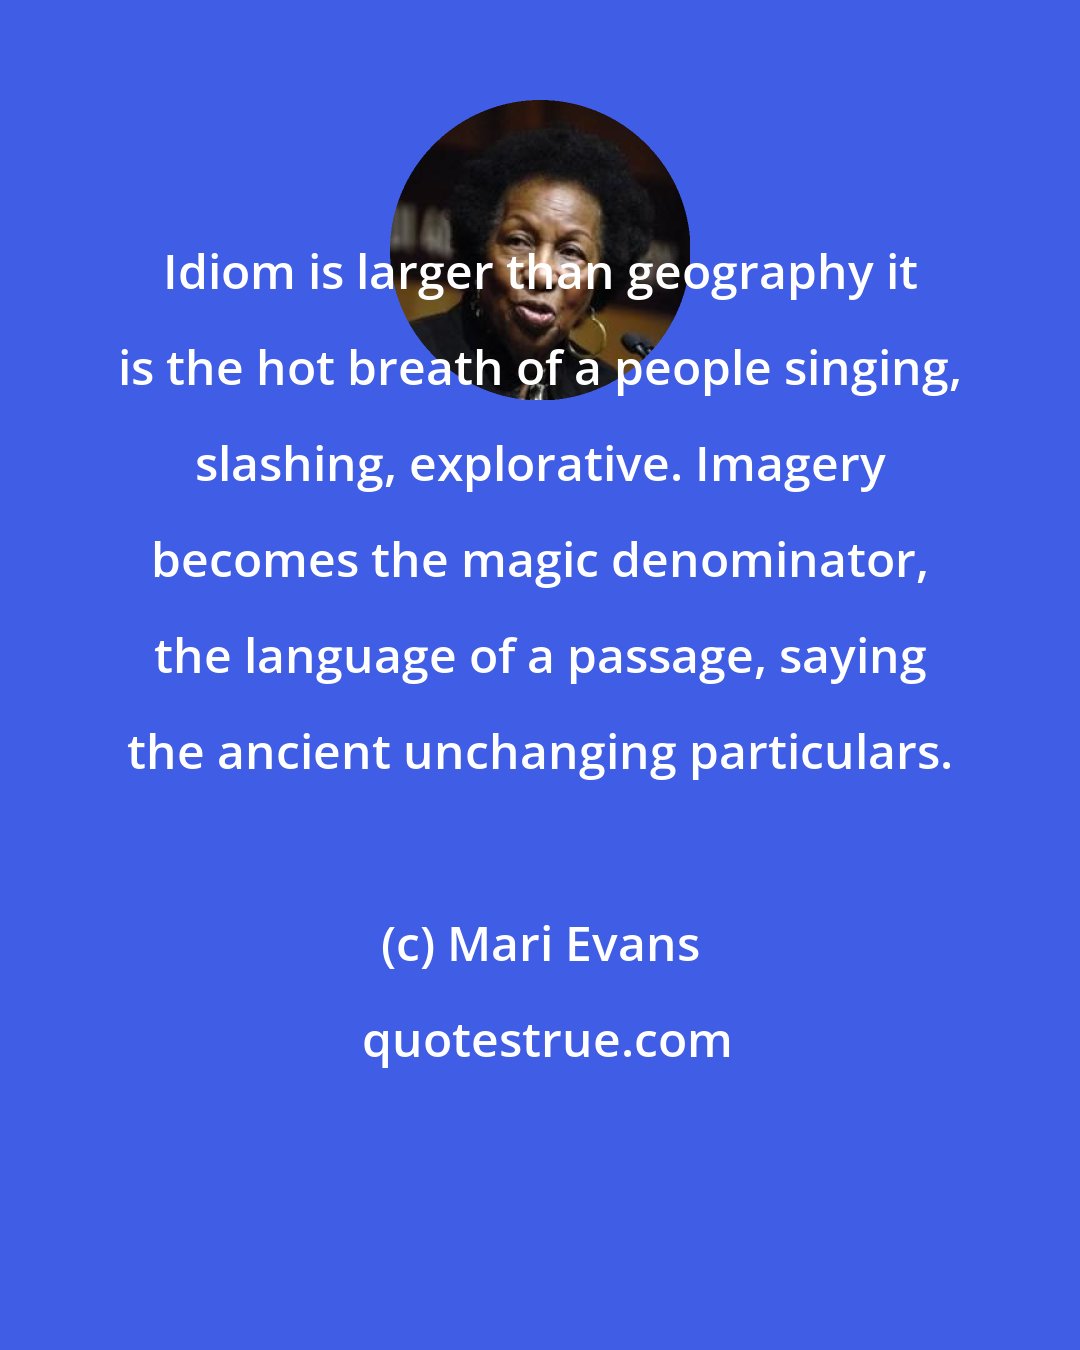 Mari Evans: Idiom is larger than geography it is the hot breath of a people singing, slashing, explorative. Imagery becomes the magic denominator, the language of a passage, saying the ancient unchanging particulars.